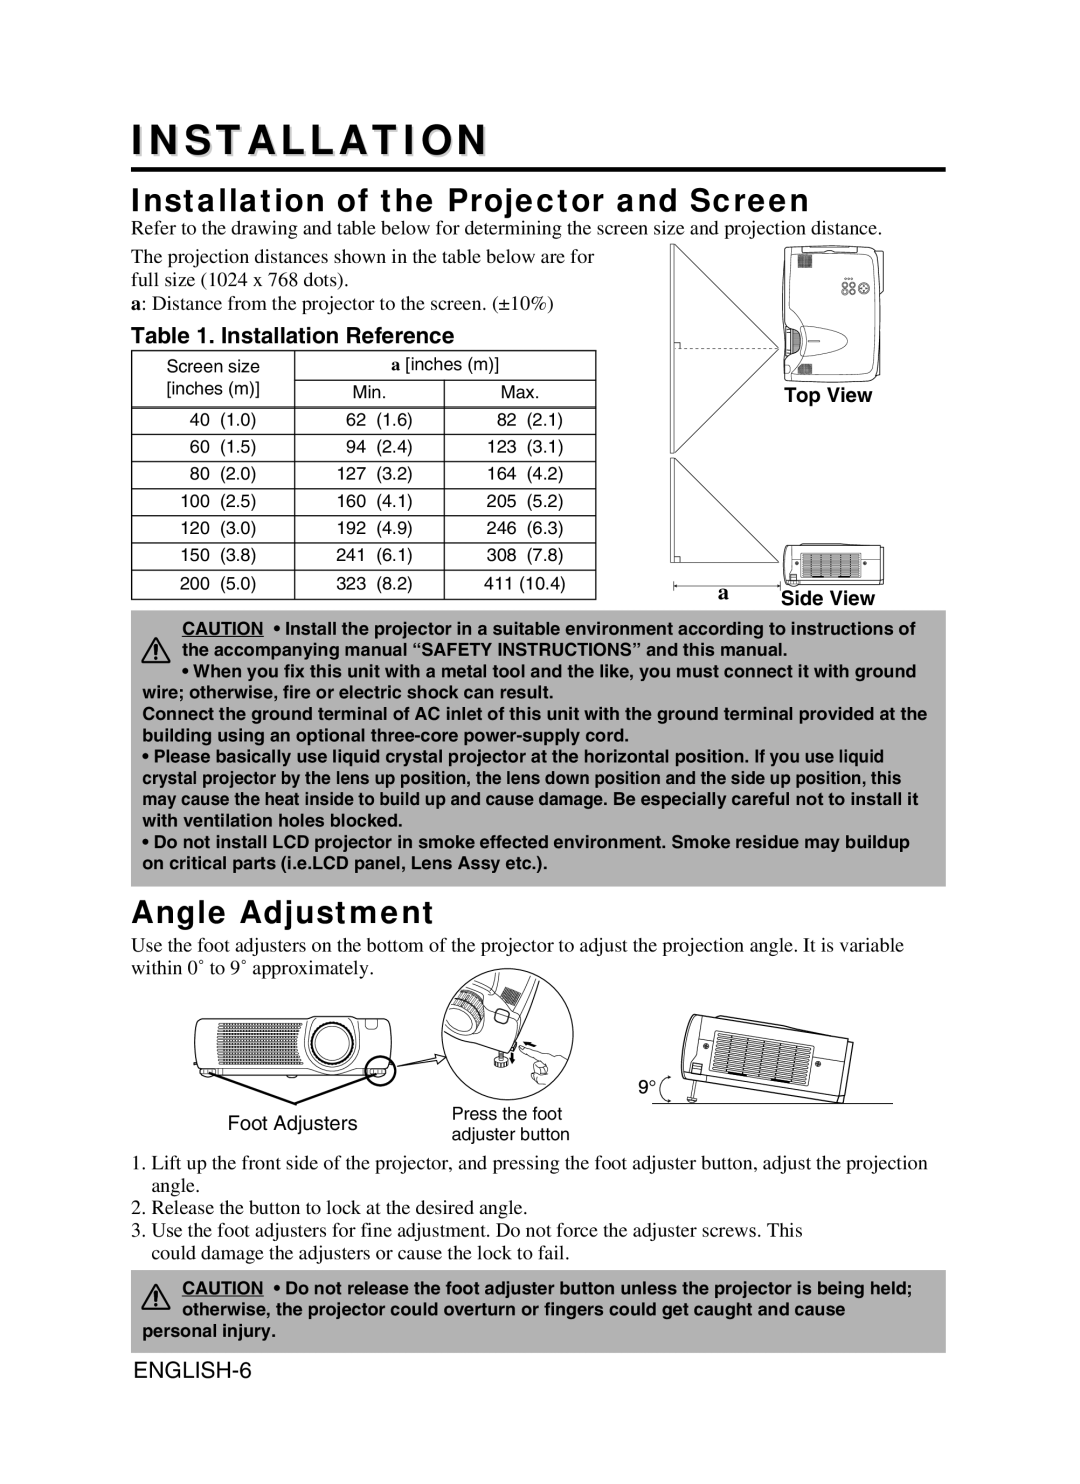 BOXLIGHT CP-775I Installation of the Projector and Screen, Angle Adjustment, Installation Reference, ENGLISH-6 